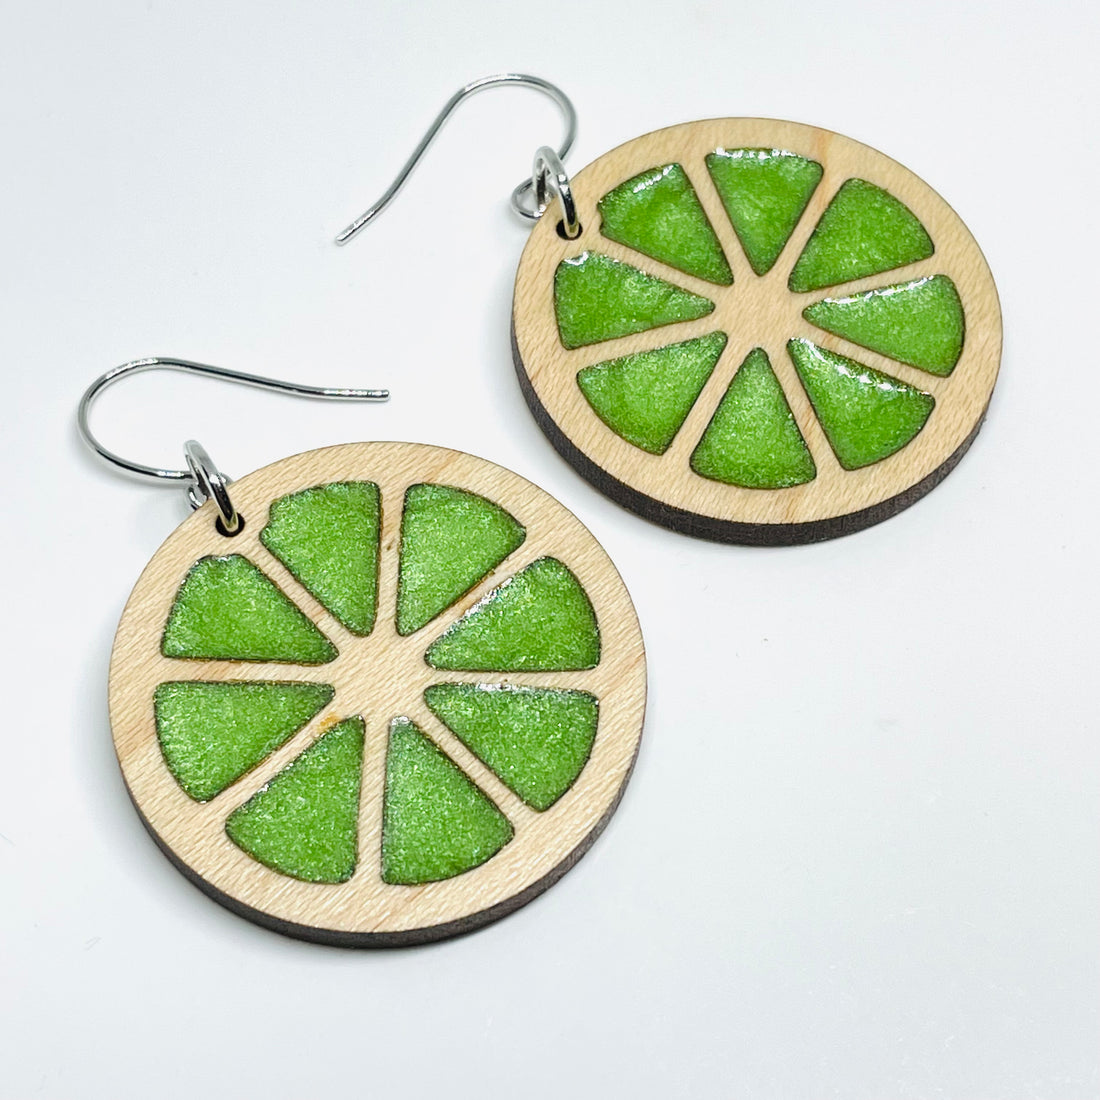 Laser Cut earrings with lime green resin. , Minnesota local wood and resin artist. Maple wood, nickel free dangle earrings citrus slice circle shaped